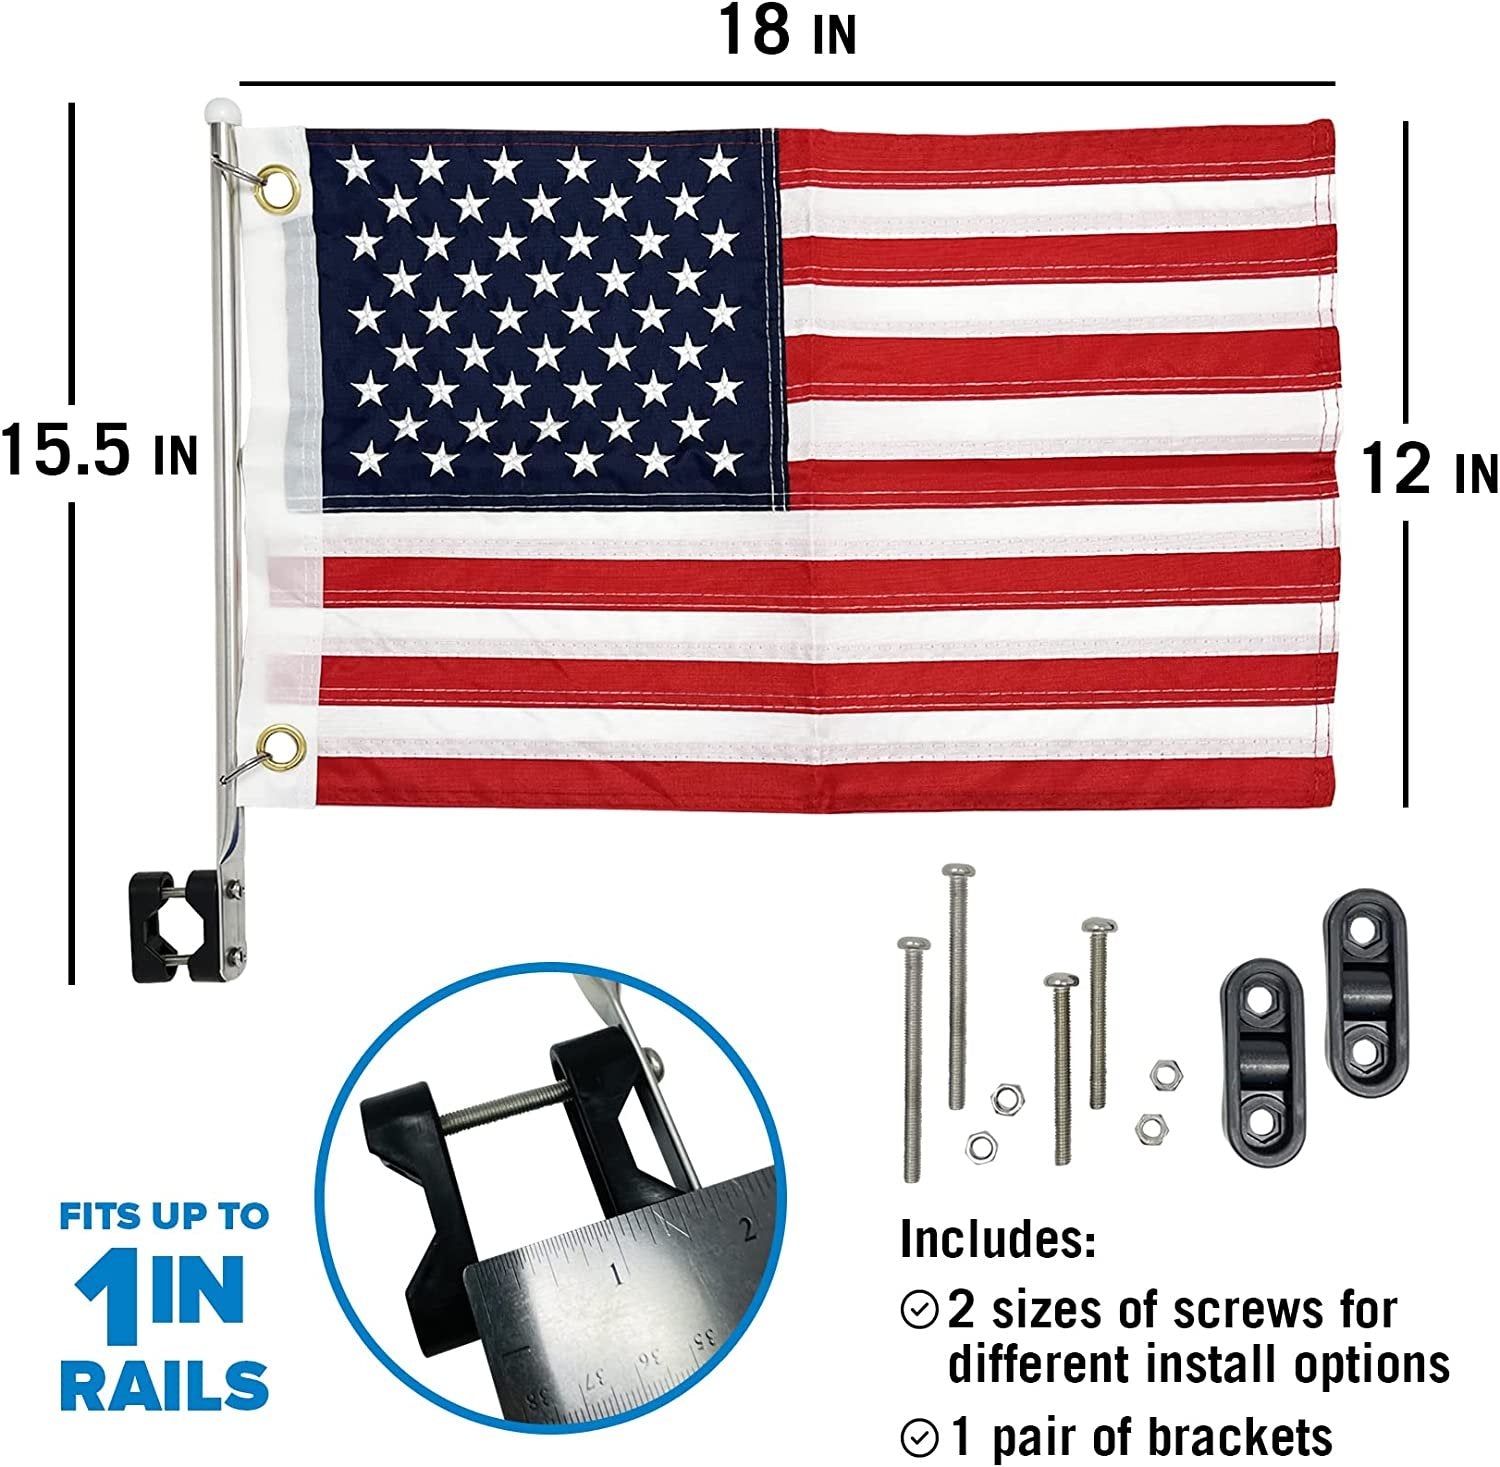 Small American Boat Flags Kit 12x18 - US Flag, Double Sided, Marine Grade with Pole Holder - Ski Rail or Pontoon Mount